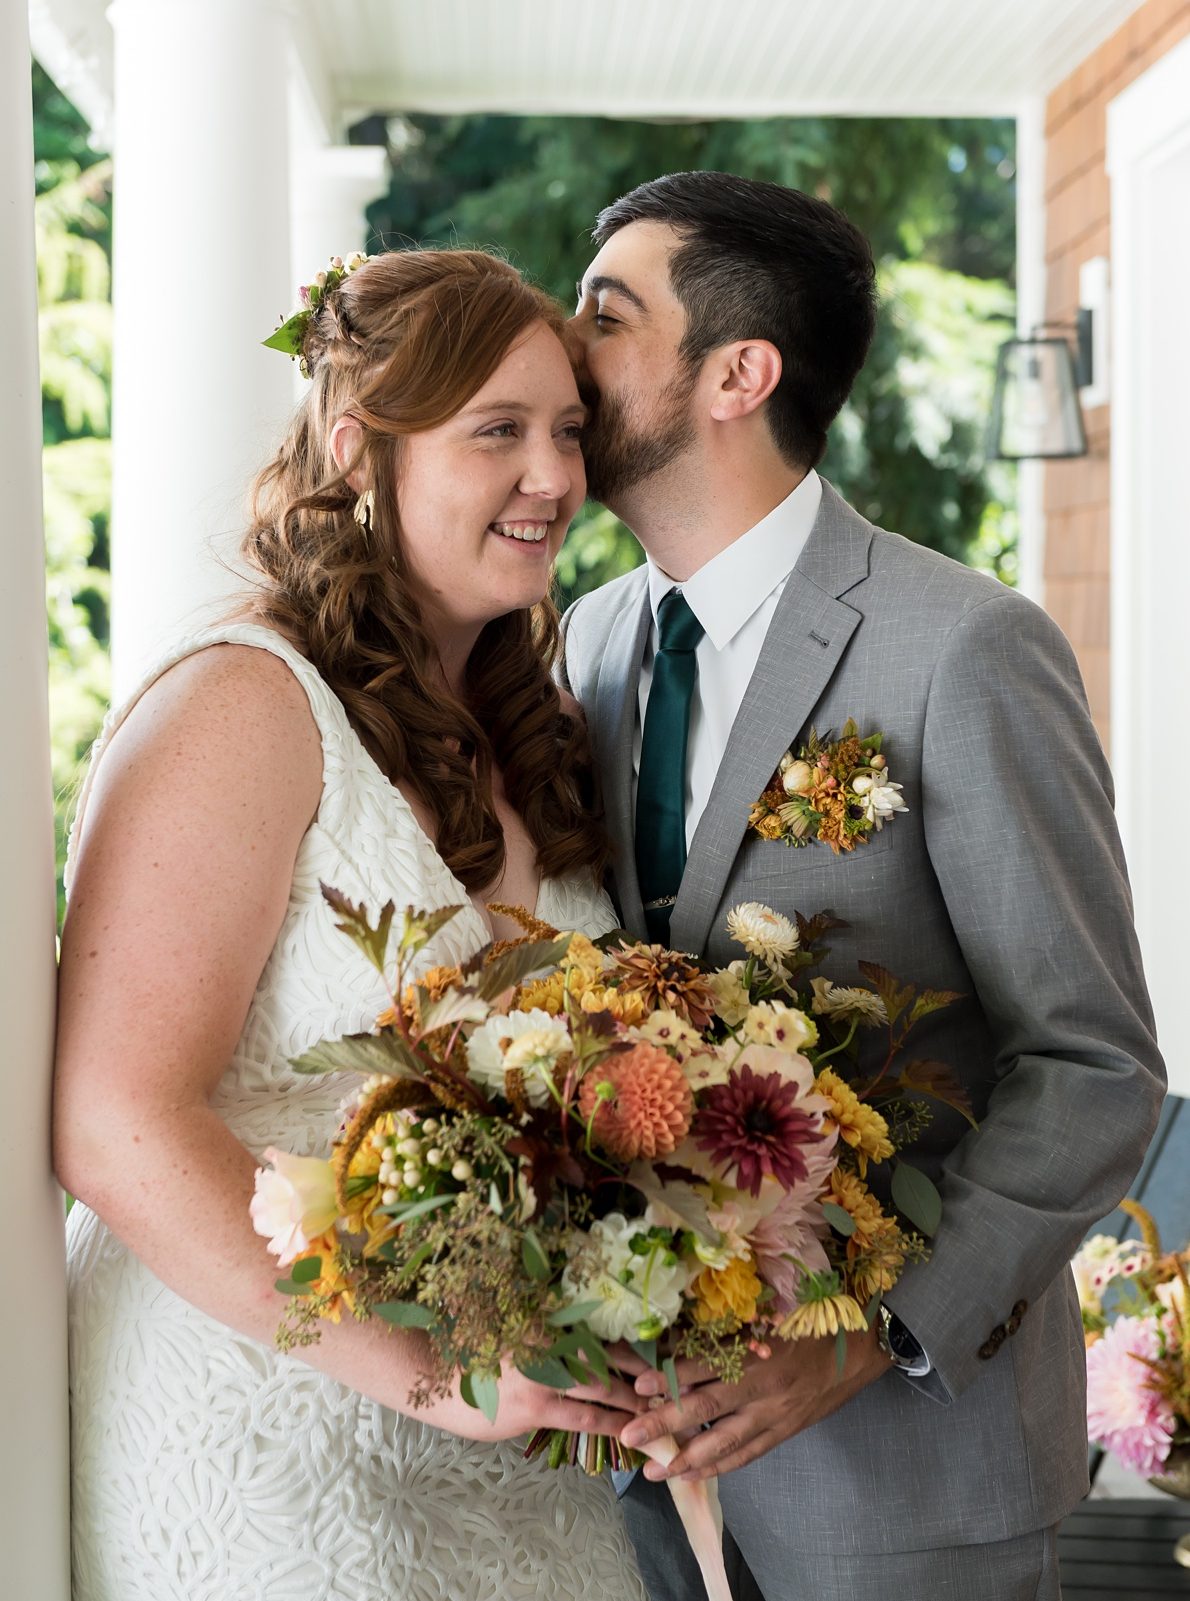 A bride and groom hold a summer bouquet